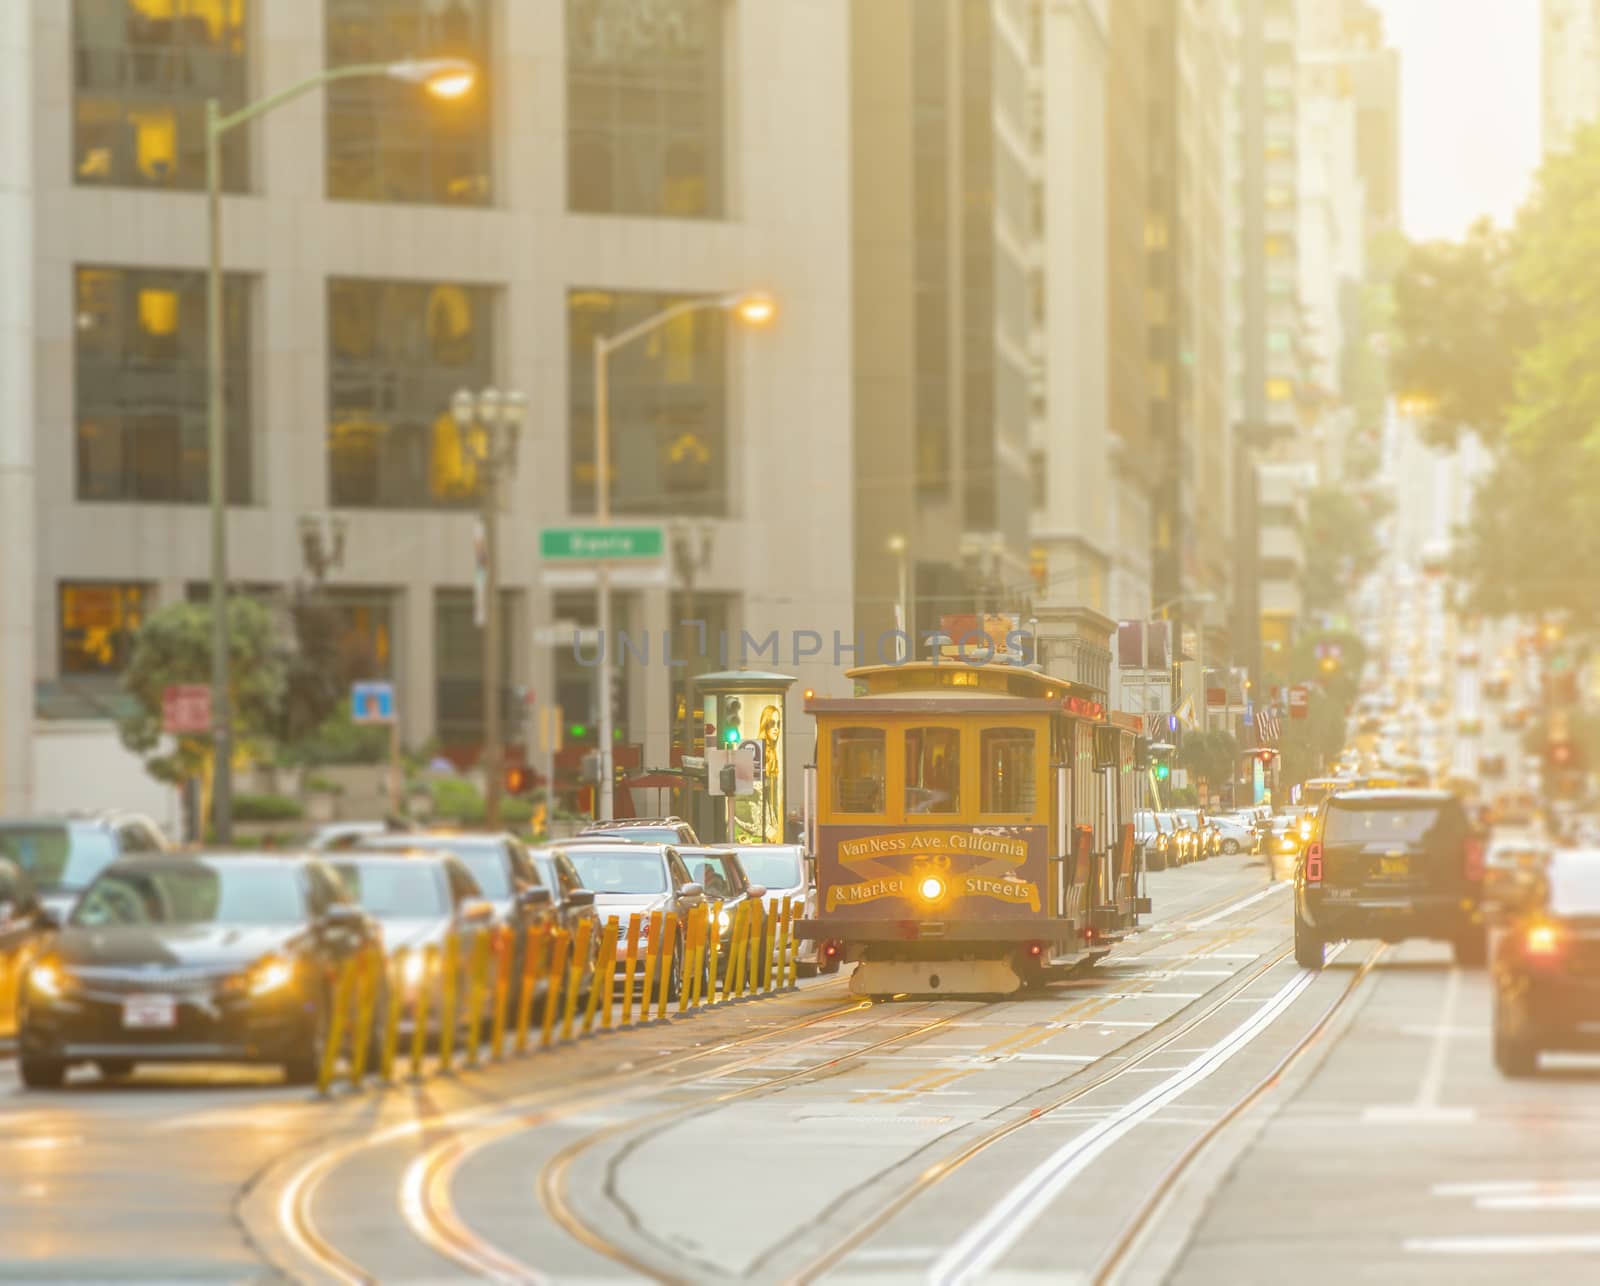 San Francisco Cable Car on focus with blurred traffic on California Street at sunset